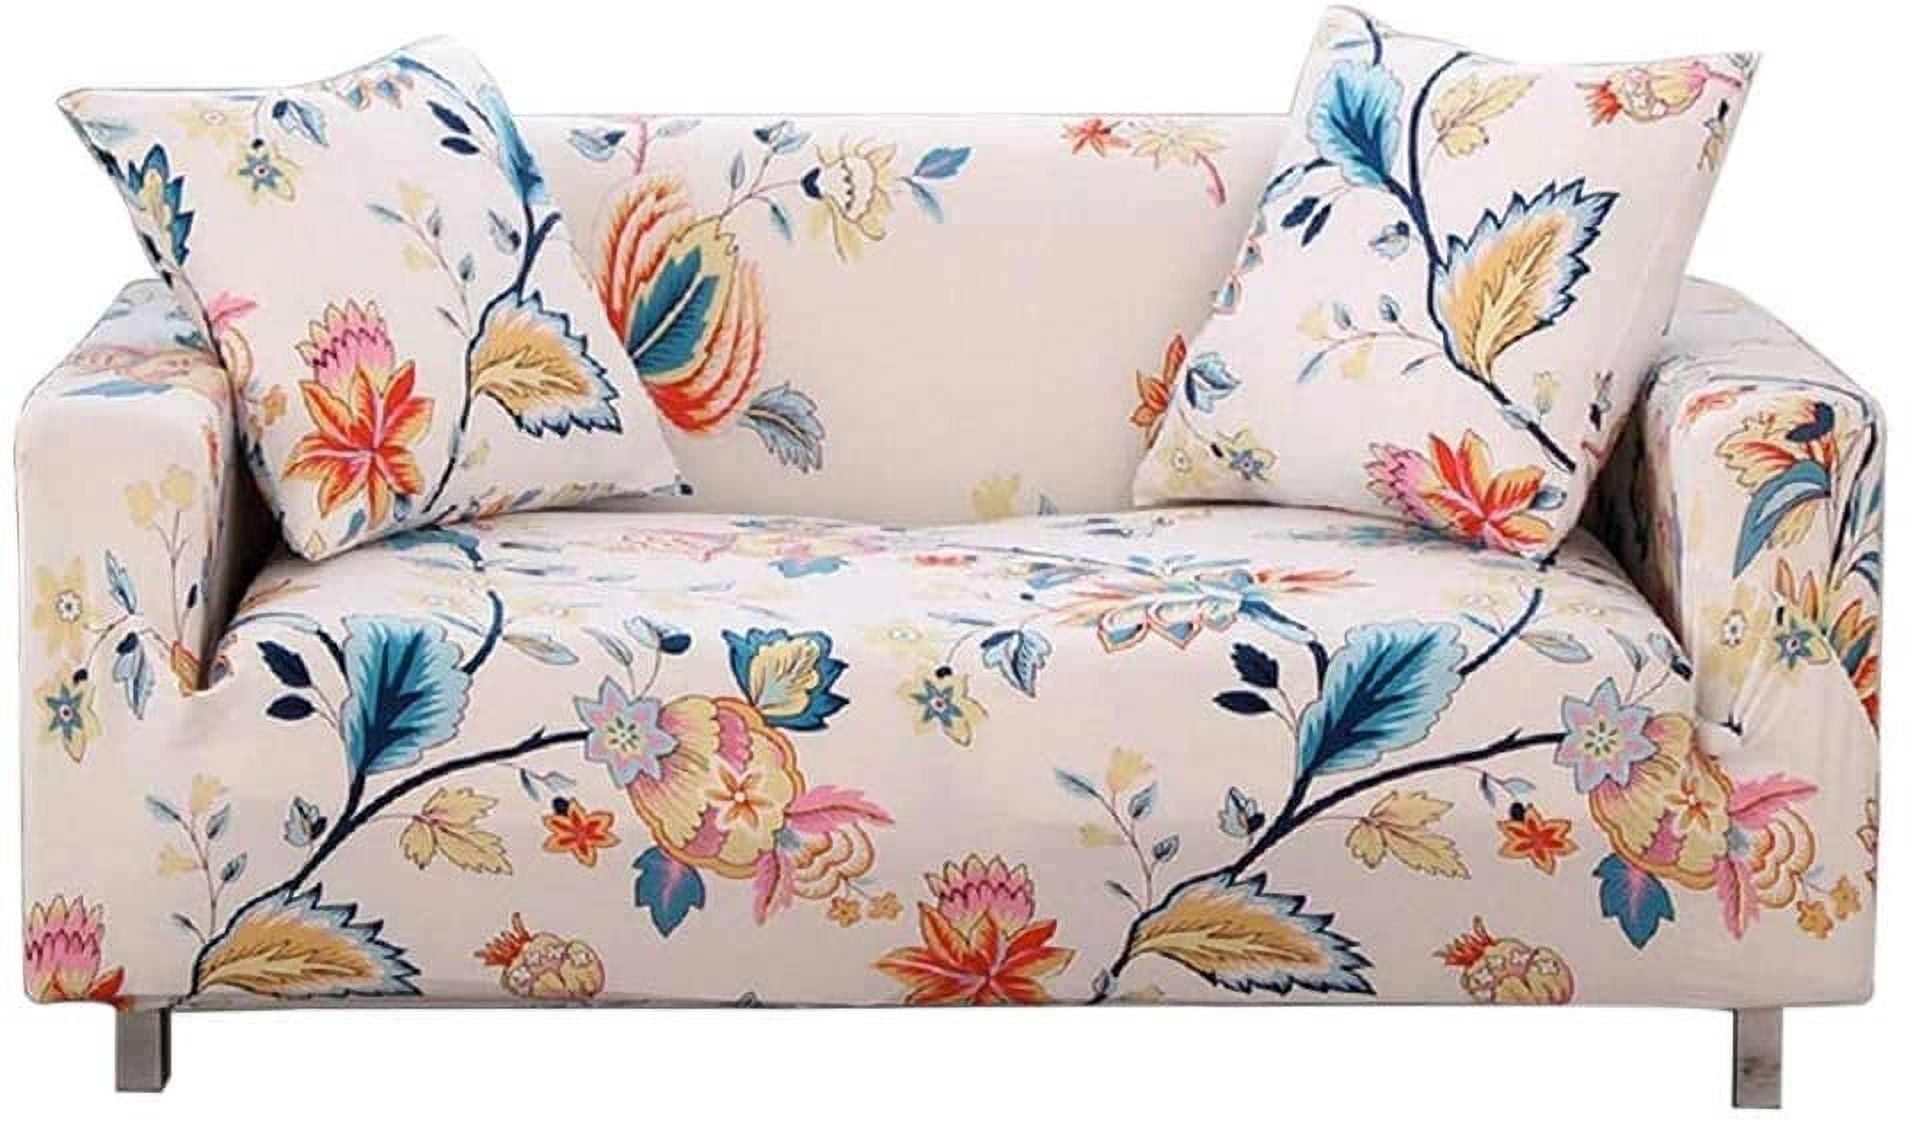 Plush Printed Stretch Plush Couch Cushion Covers For Individual Cushions  Sofa Cushion Covers Seat Cushion Covers, Thicker Bouncy